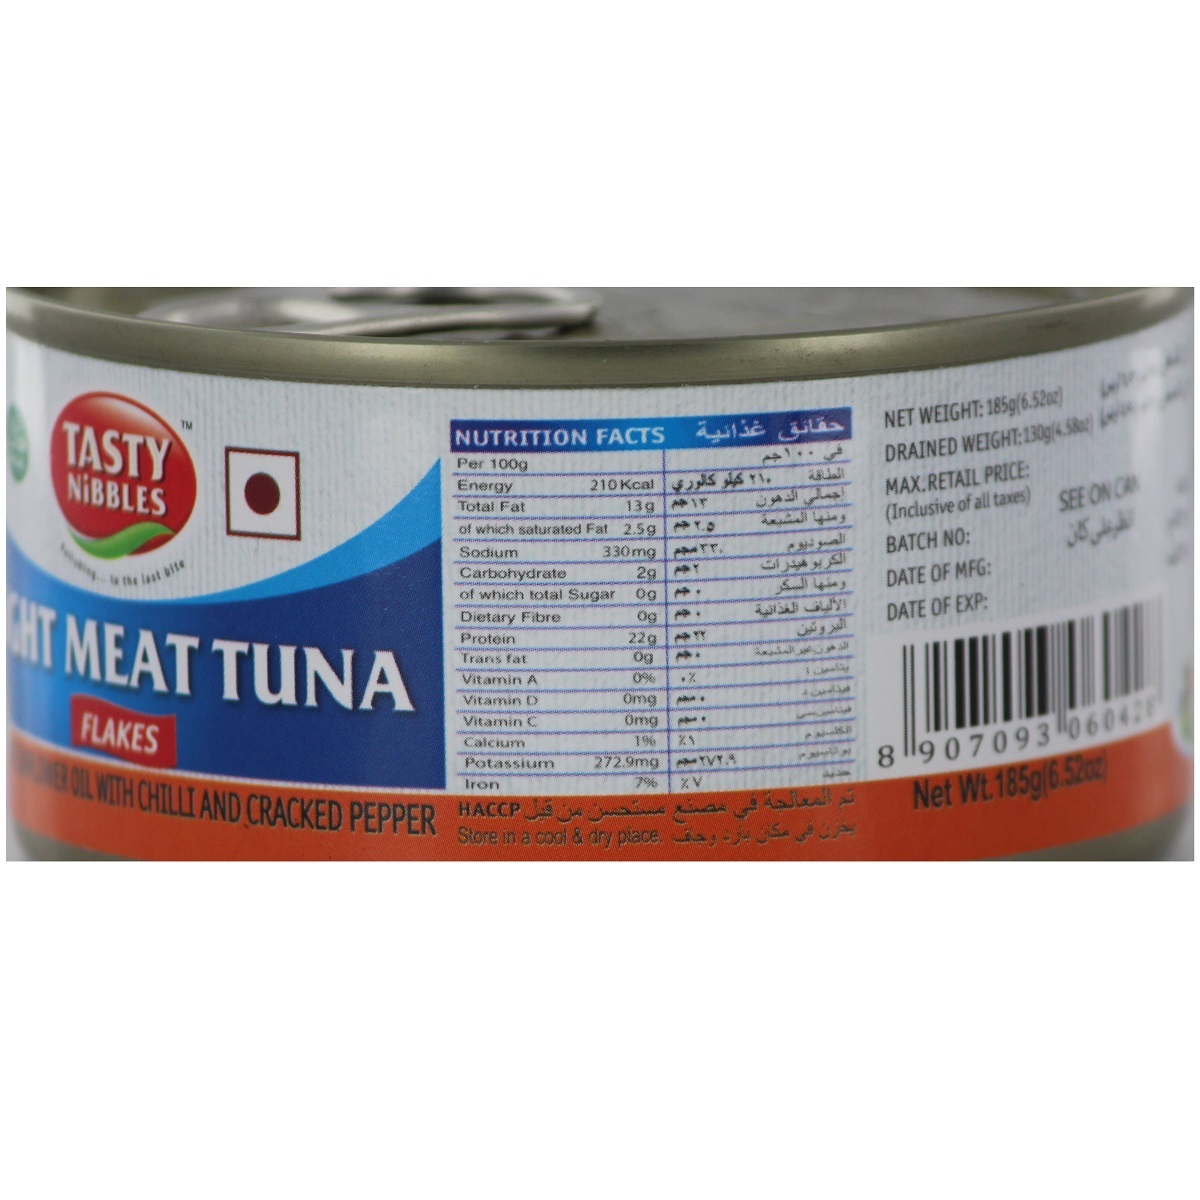 Tasty Nibbles Light Meat Tuna Flakes in Sunflower Oil With Chilli and Cracked Pepper 185g